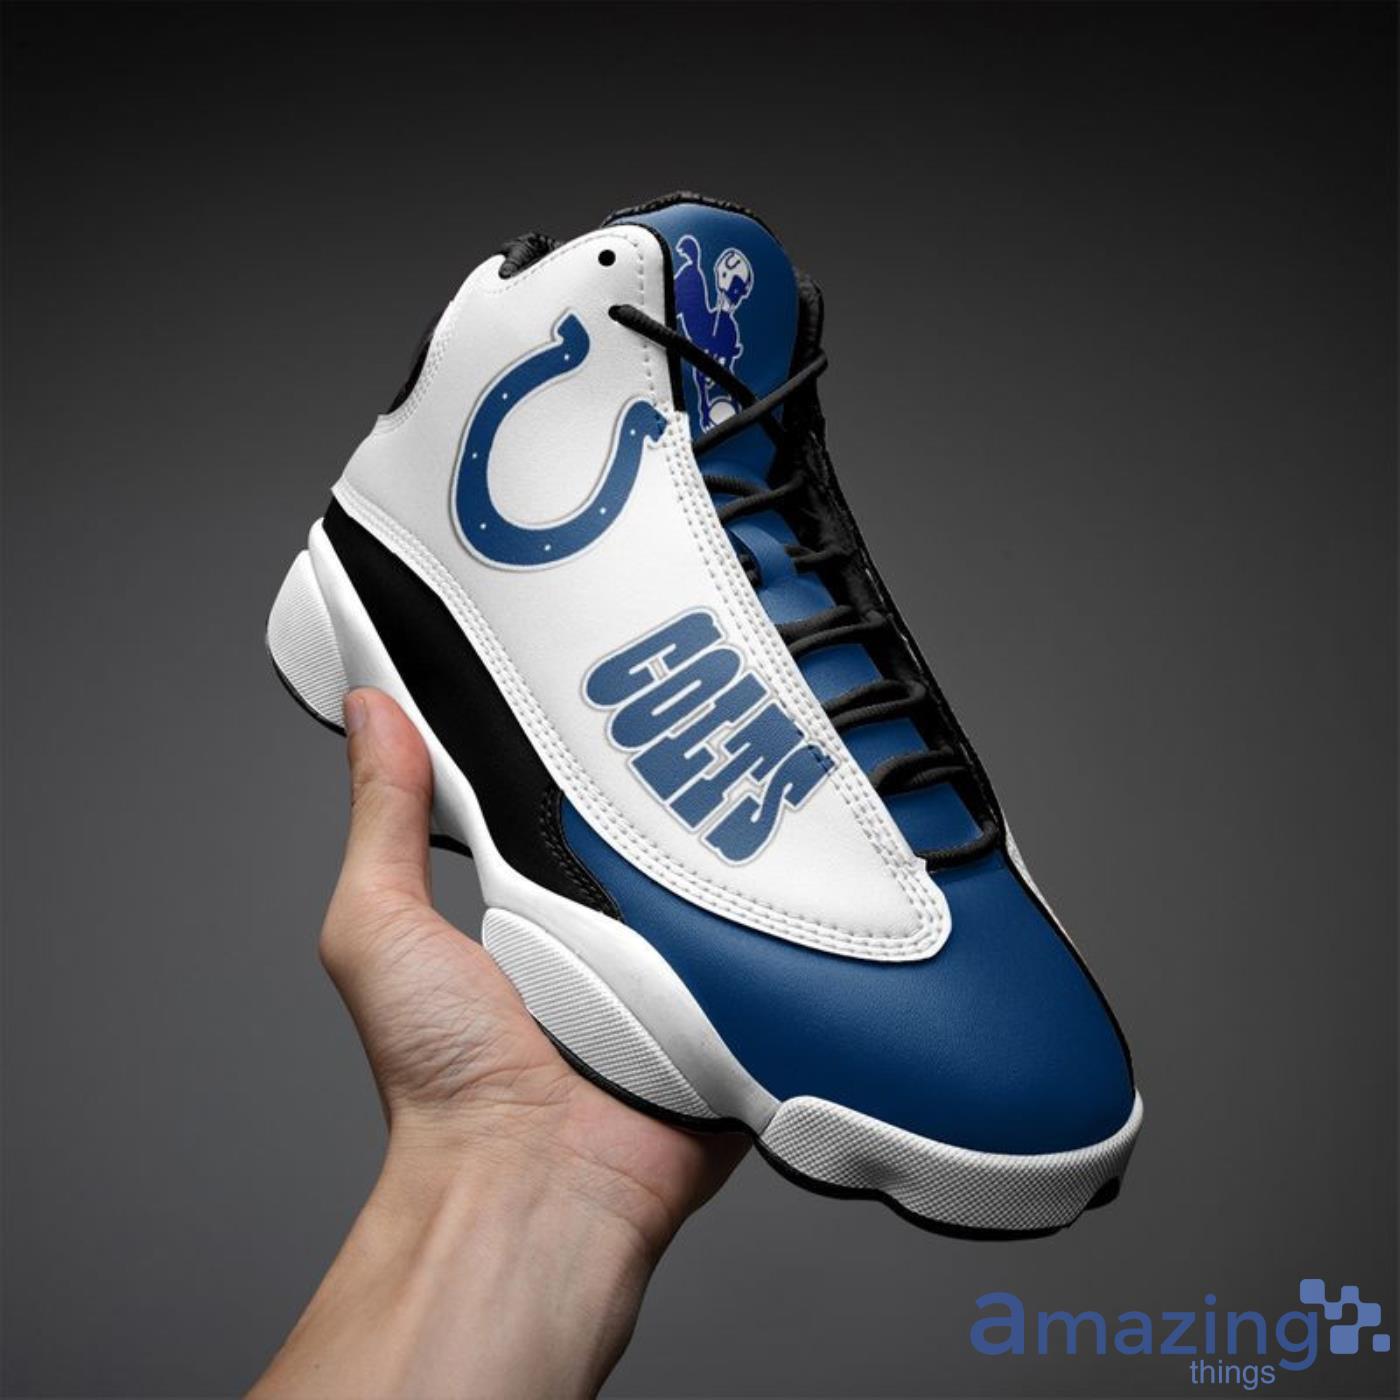 Are Air Jordans Worth the Purchase? – The Colt